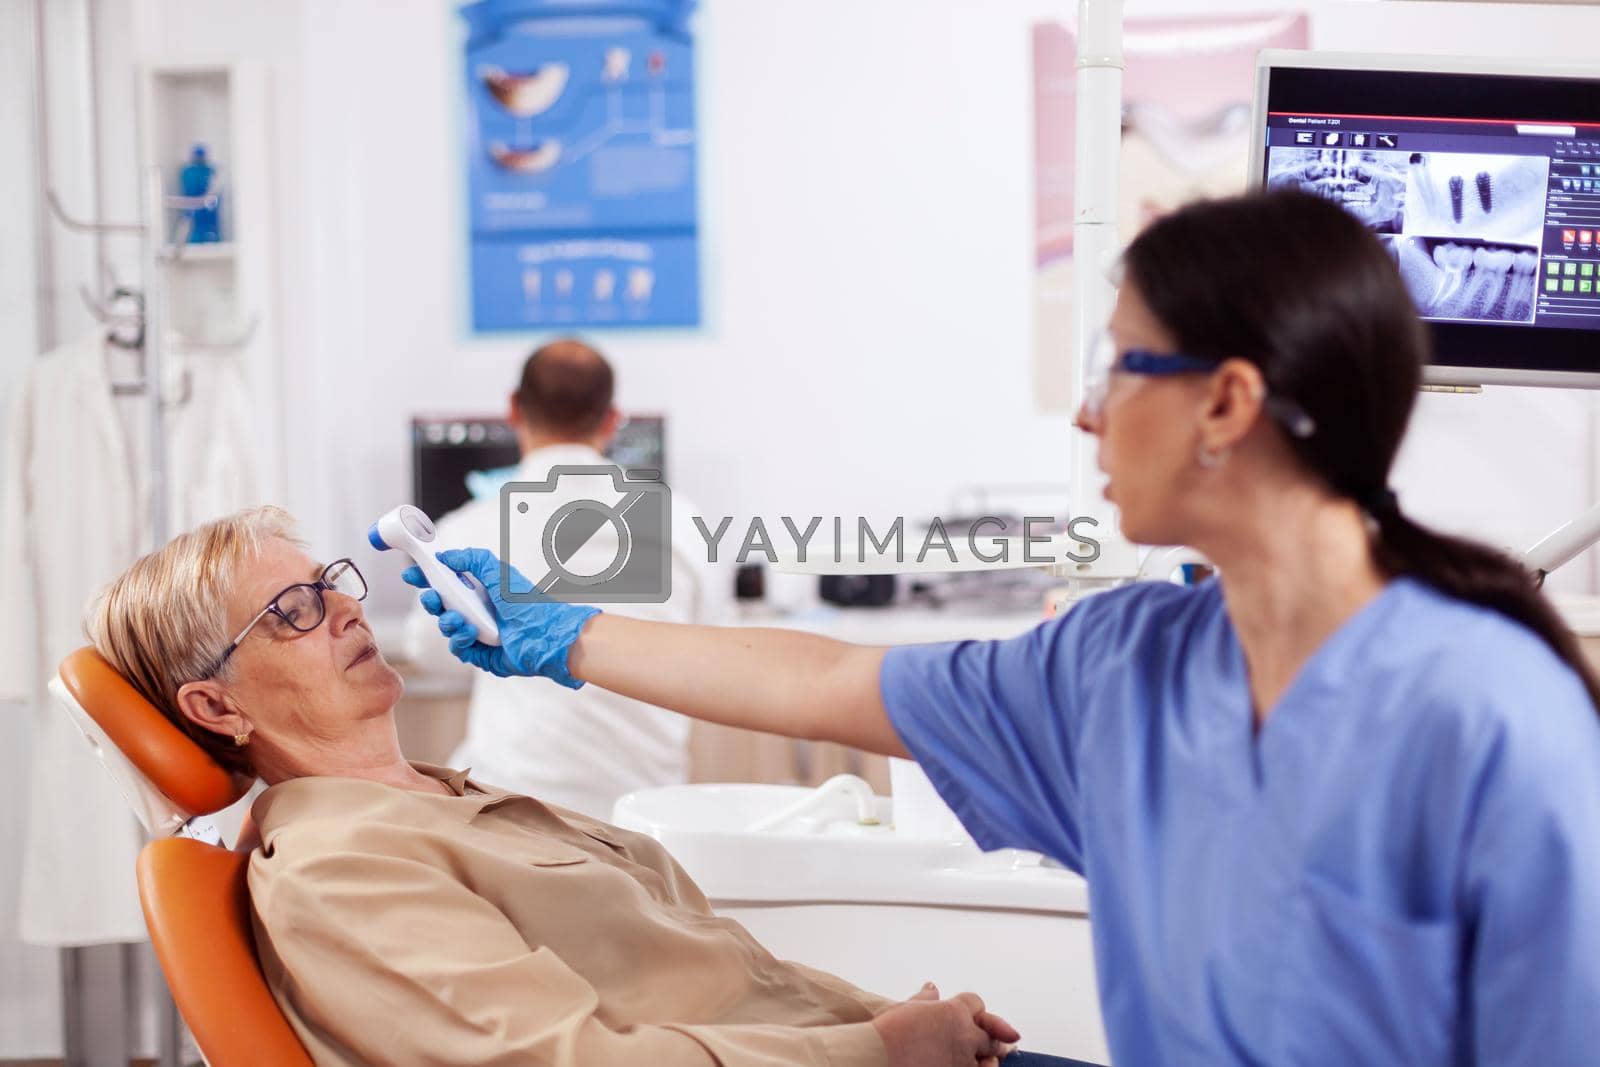 Dentist assistant measuring senior woman body temperature using thermometer during consultation. Medical specialist in dental clinic taking patient temperature using digital device.